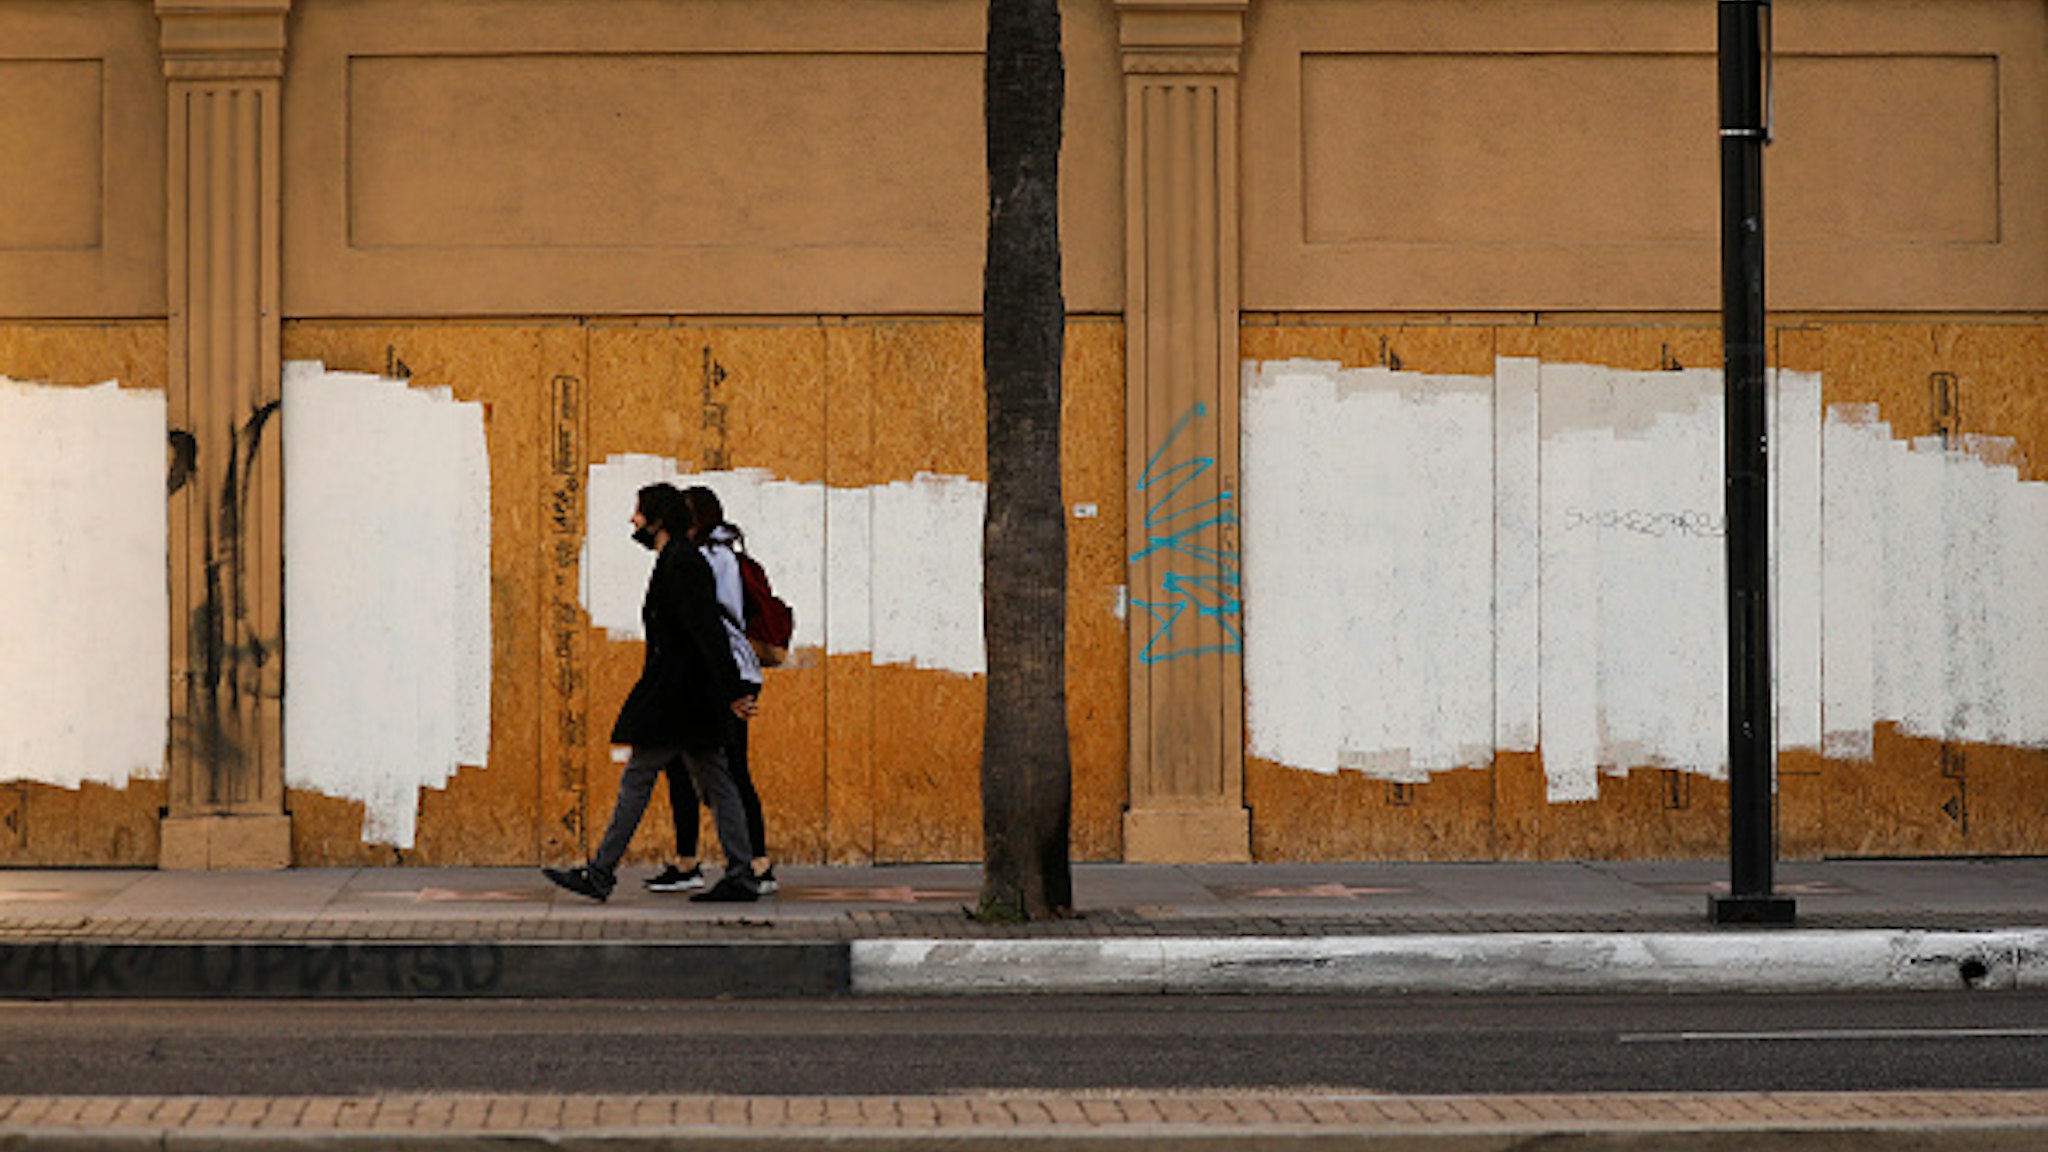 LOS ANGELES, CA - DECEMBER 02: Pedestrians walk past boarded windows of a building on Hollywood Blvd and North Sycamore Ave in Hollywood which is close to Rochelle Begaye, 42, who has created a complex nearby stitched together with plywood, bed frames, and various fencing materials to create a encampment of tents covered with discarded plastic and tarps located on a sliver of land at the corner of Hollywood at La Brea containing the Four Ladies of Hollywood. Hollywood on Wednesday, Dec. 2, 2020 in Los Angeles, CA